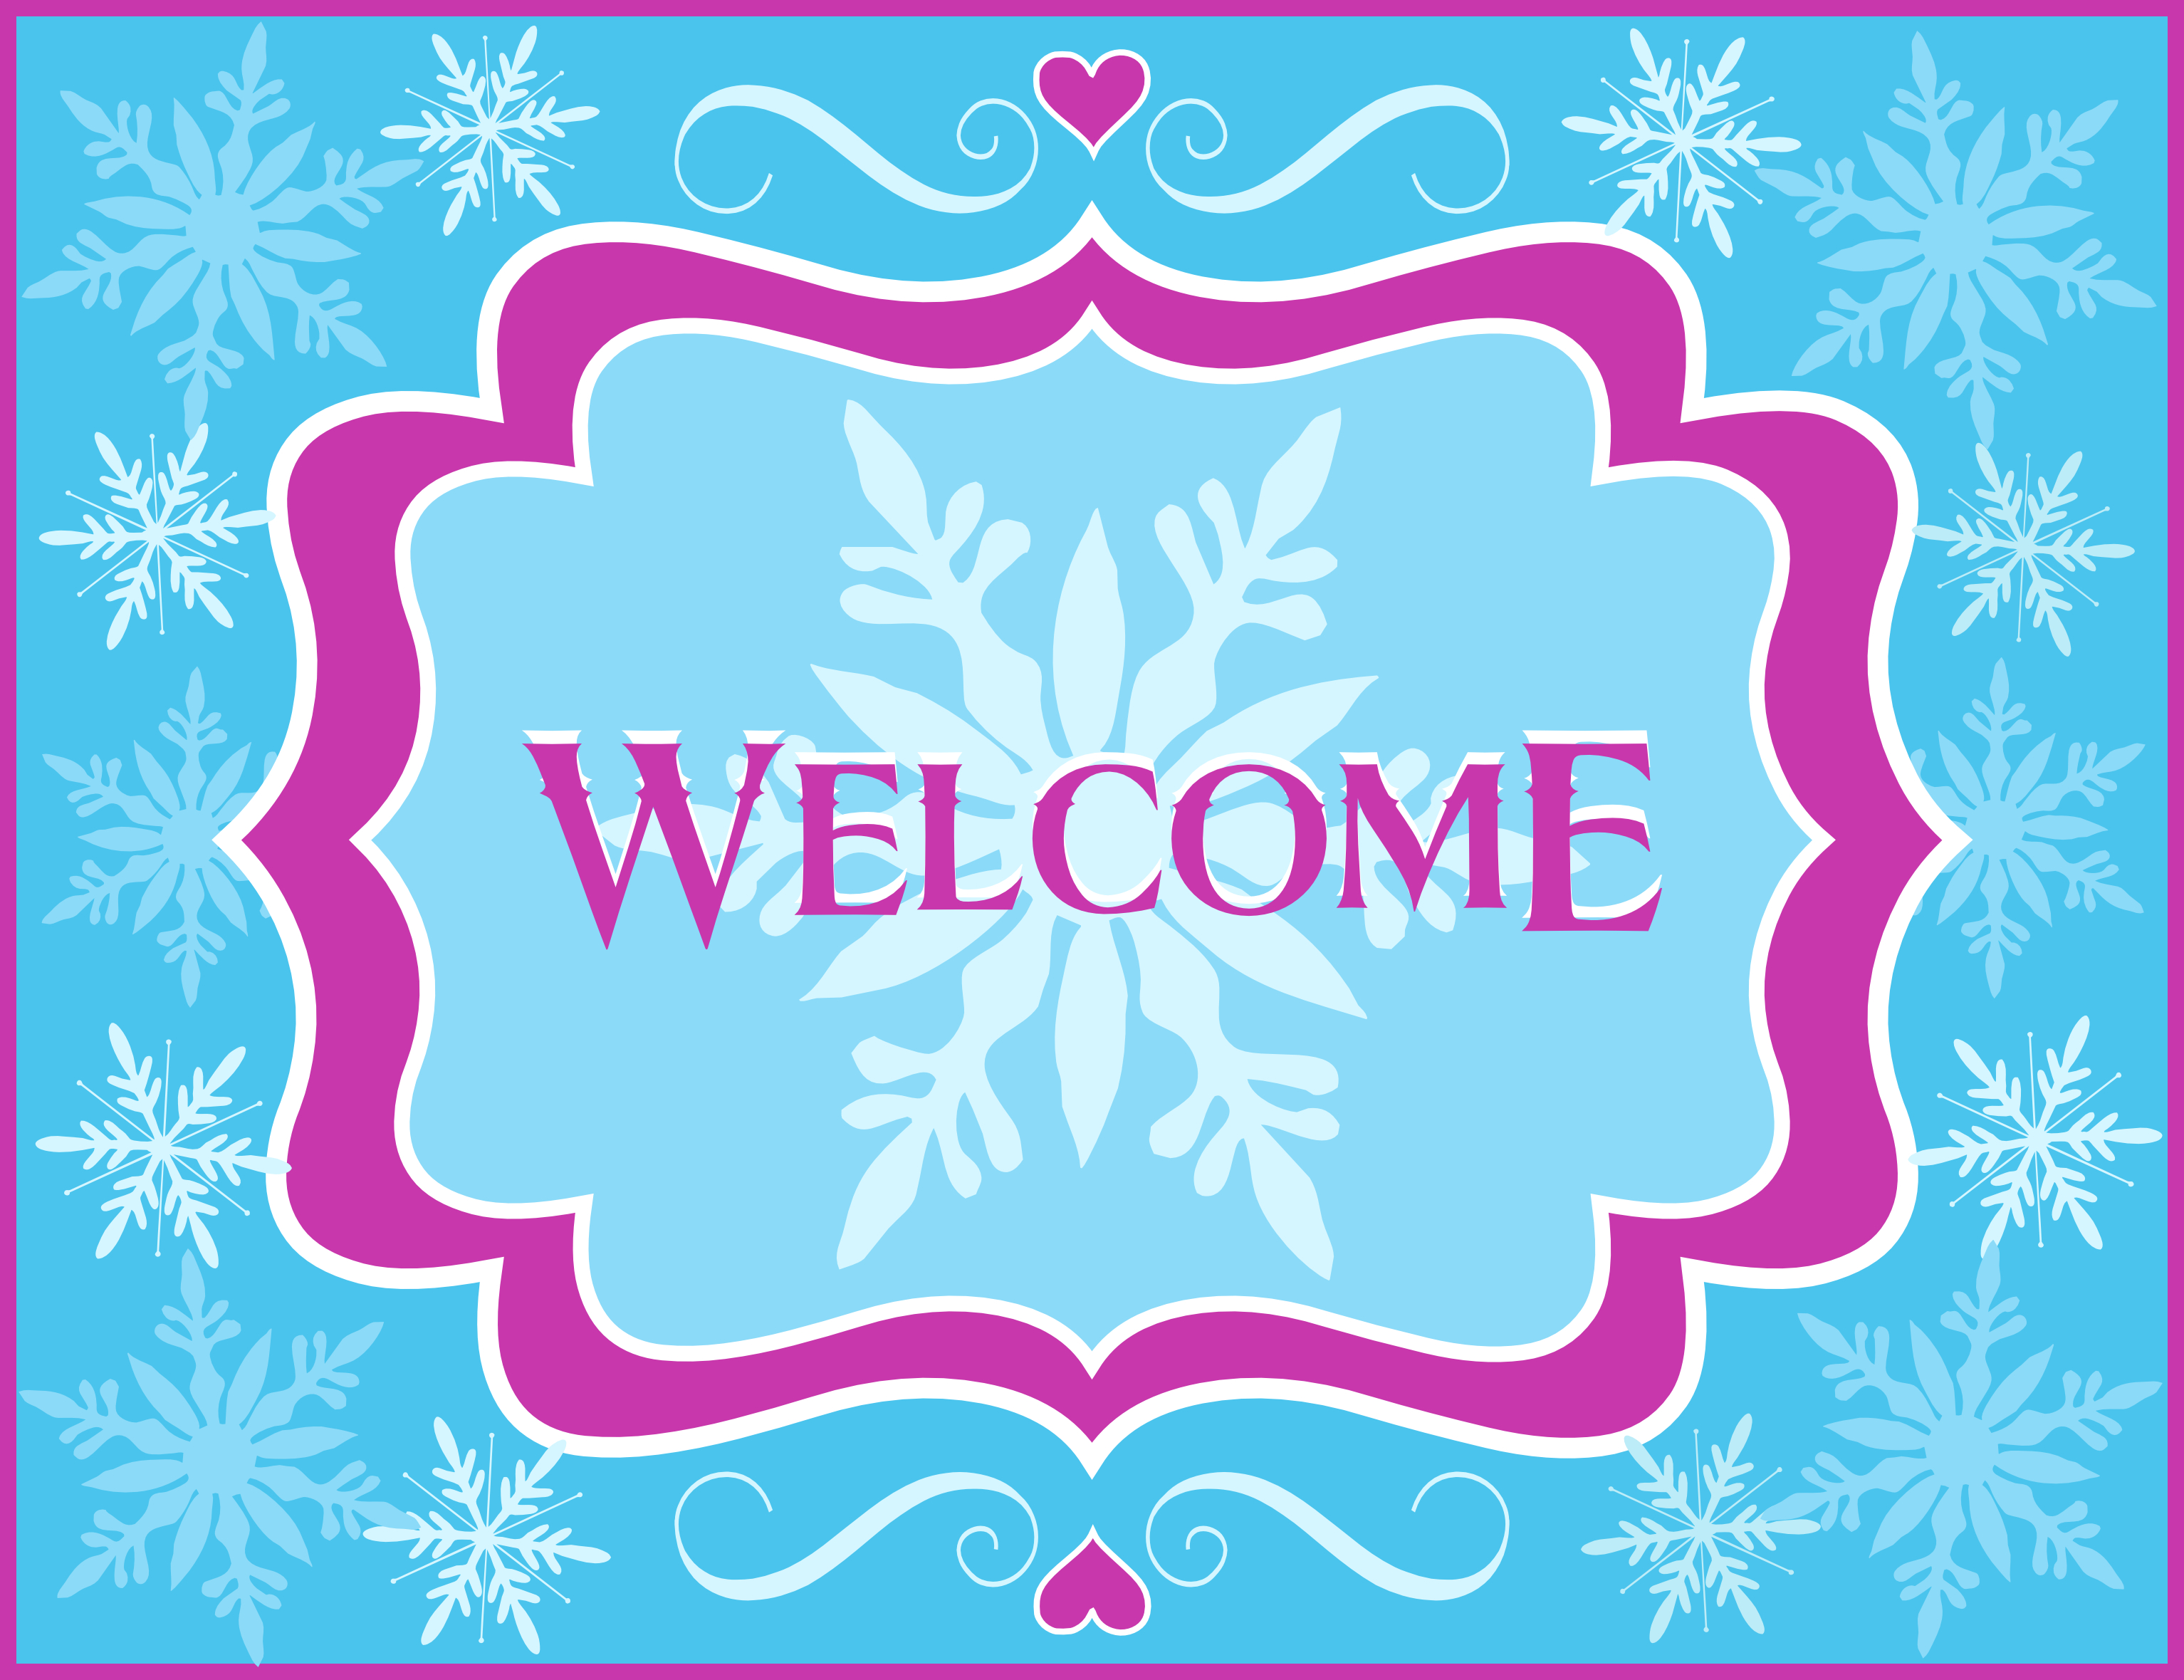 Free Frozen Party Printables From Printabelle | Catch My Party - Free Printable Welcome Cards